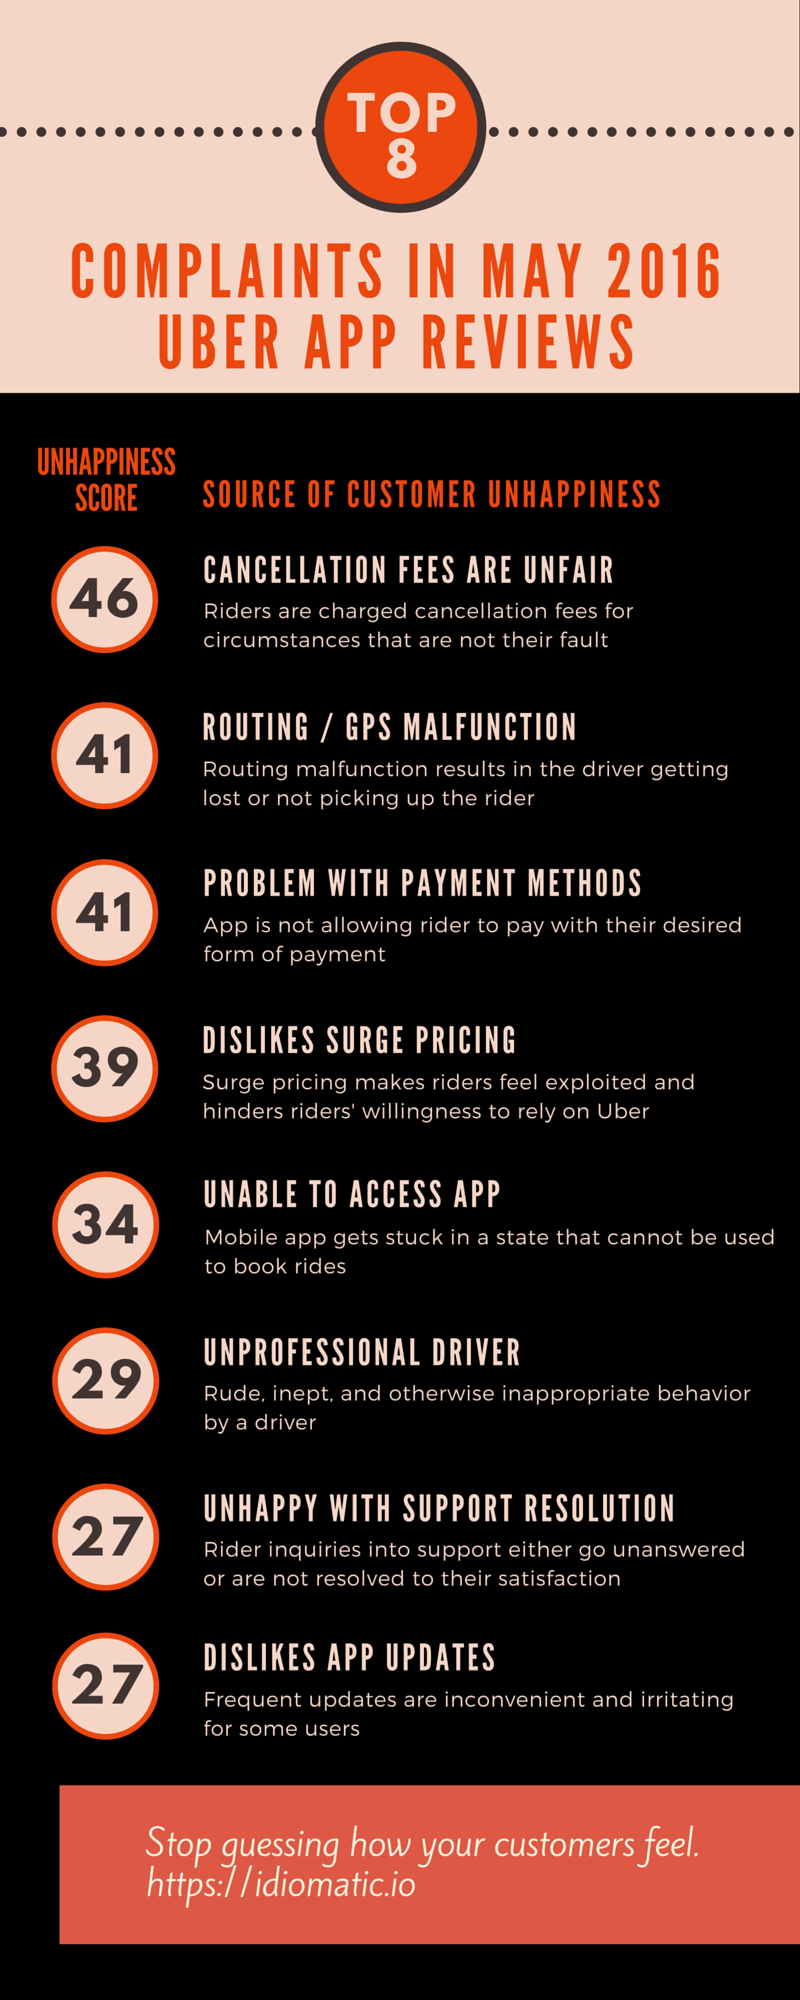 Top 8 Uber App Review Pain Points (1)